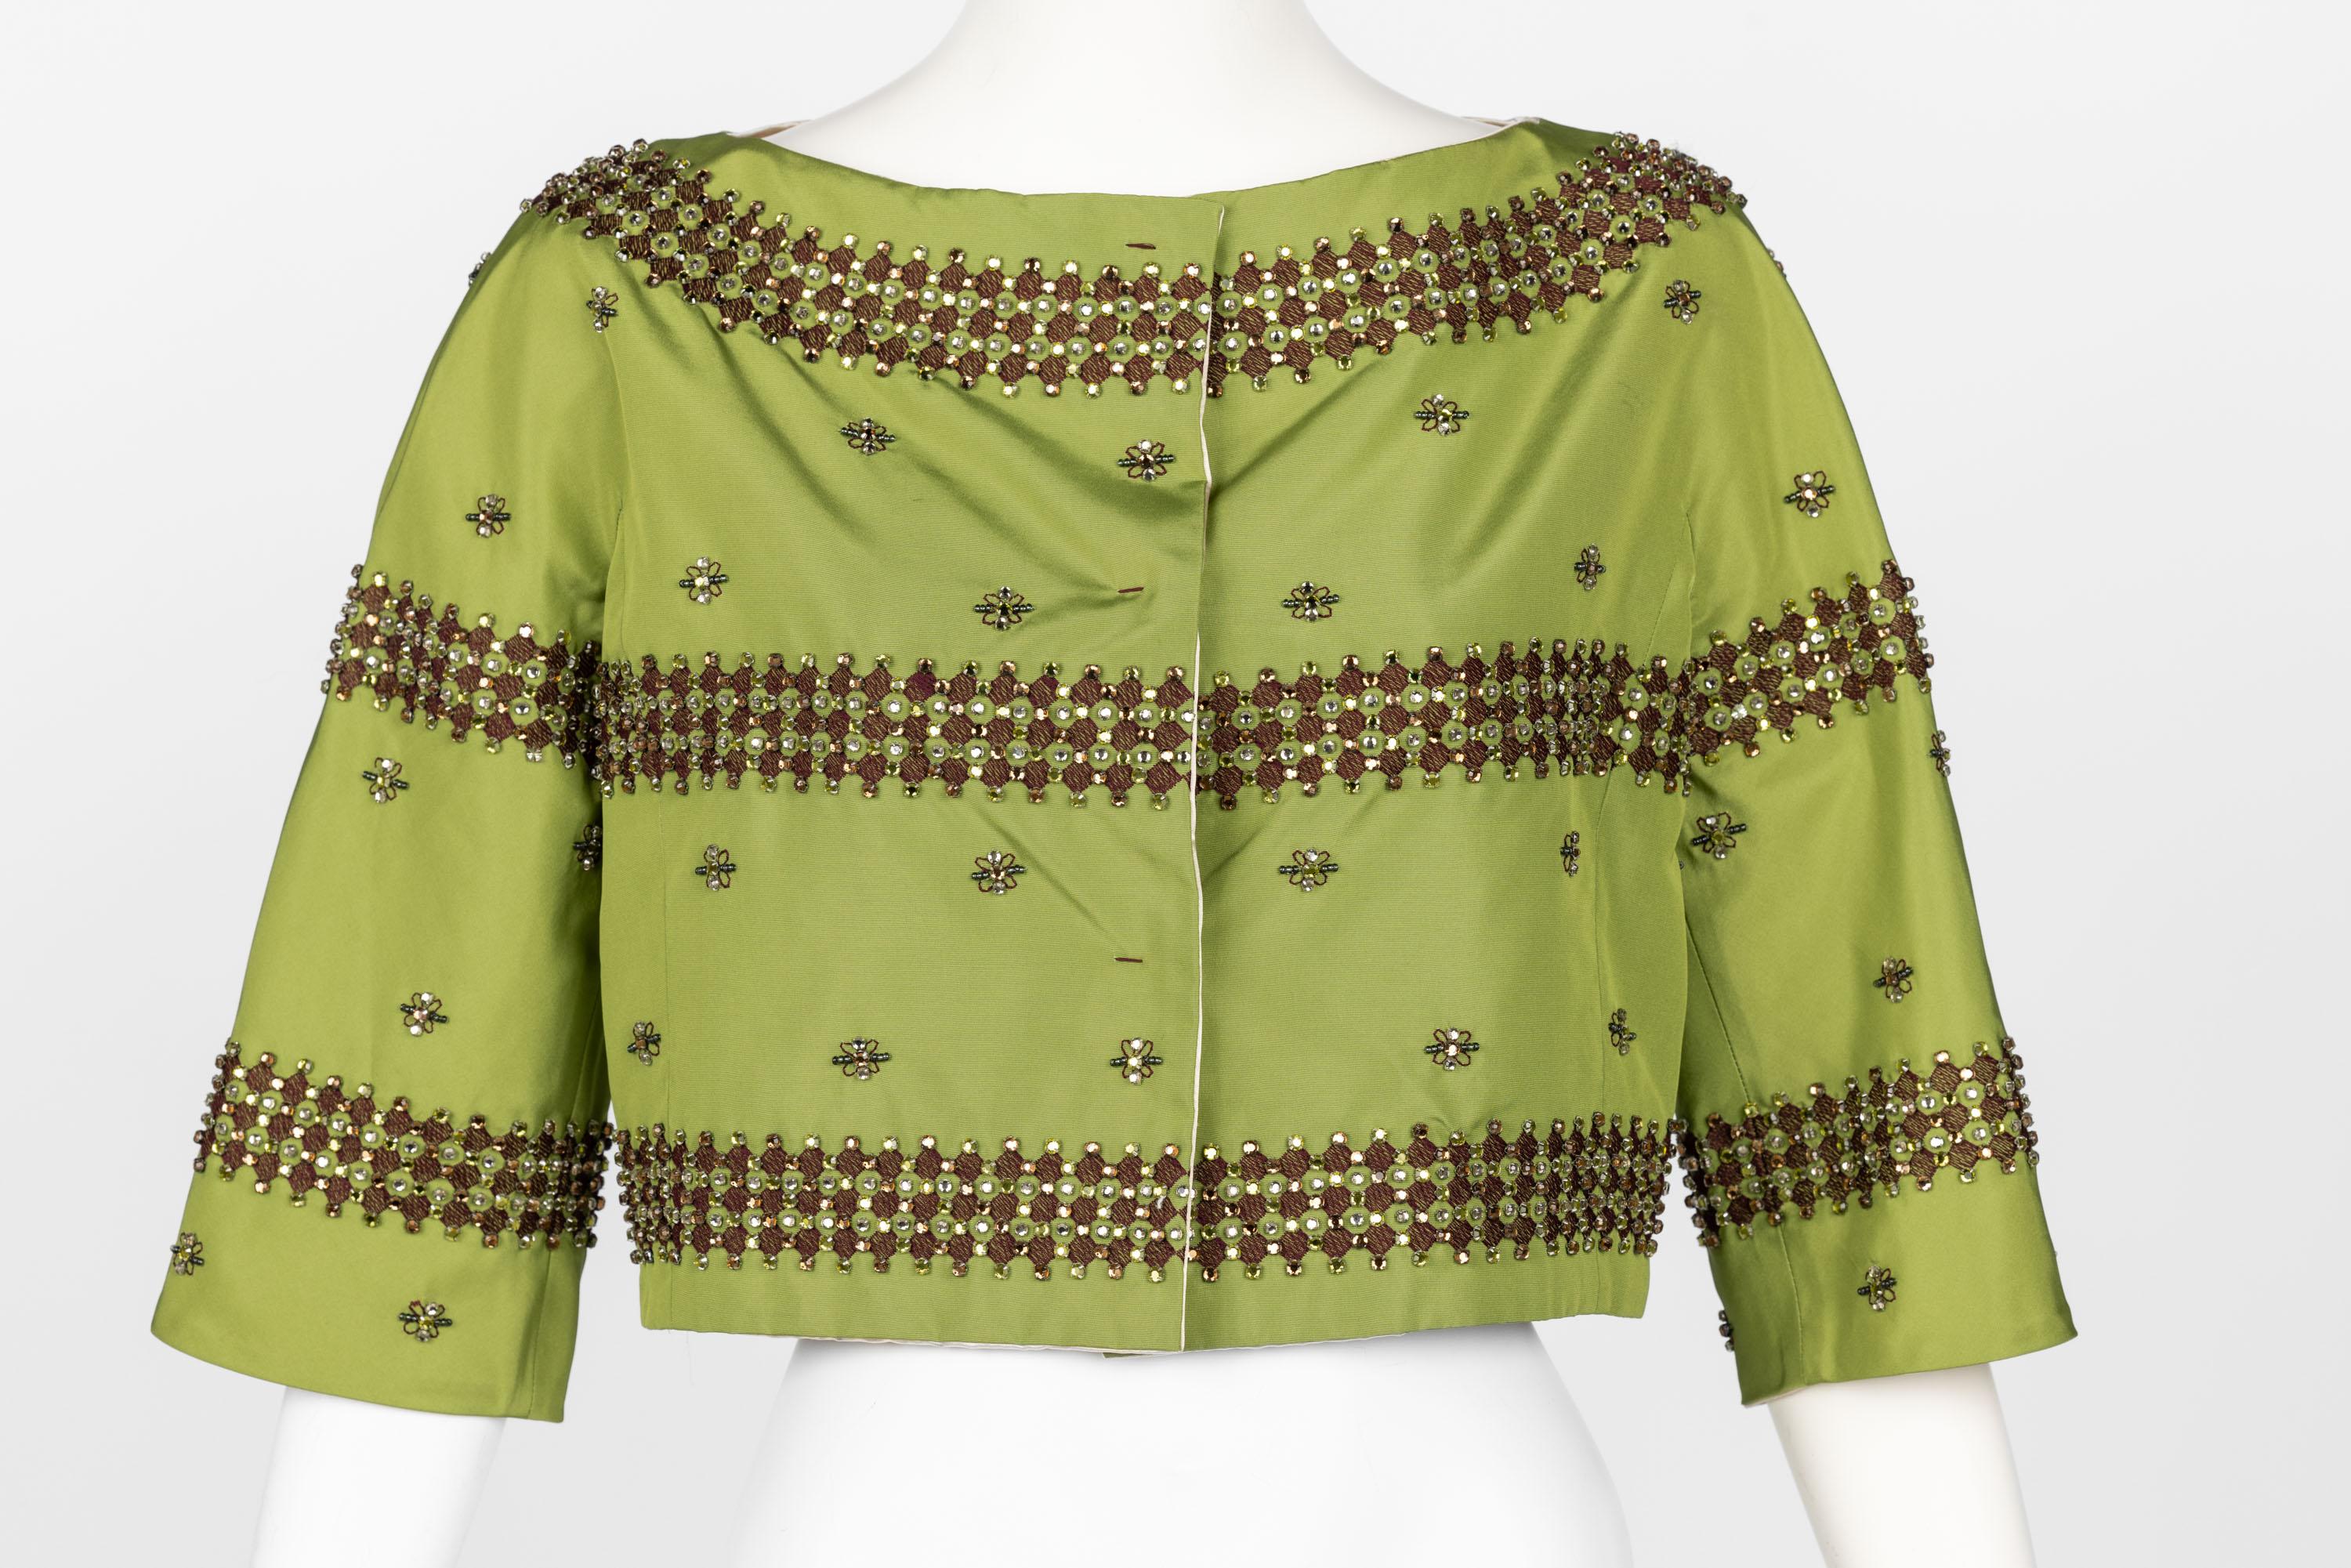 Women's Prada F/W 2004 Green Silk Crystal Embellished Cropped Jacket Limited Edition For Sale